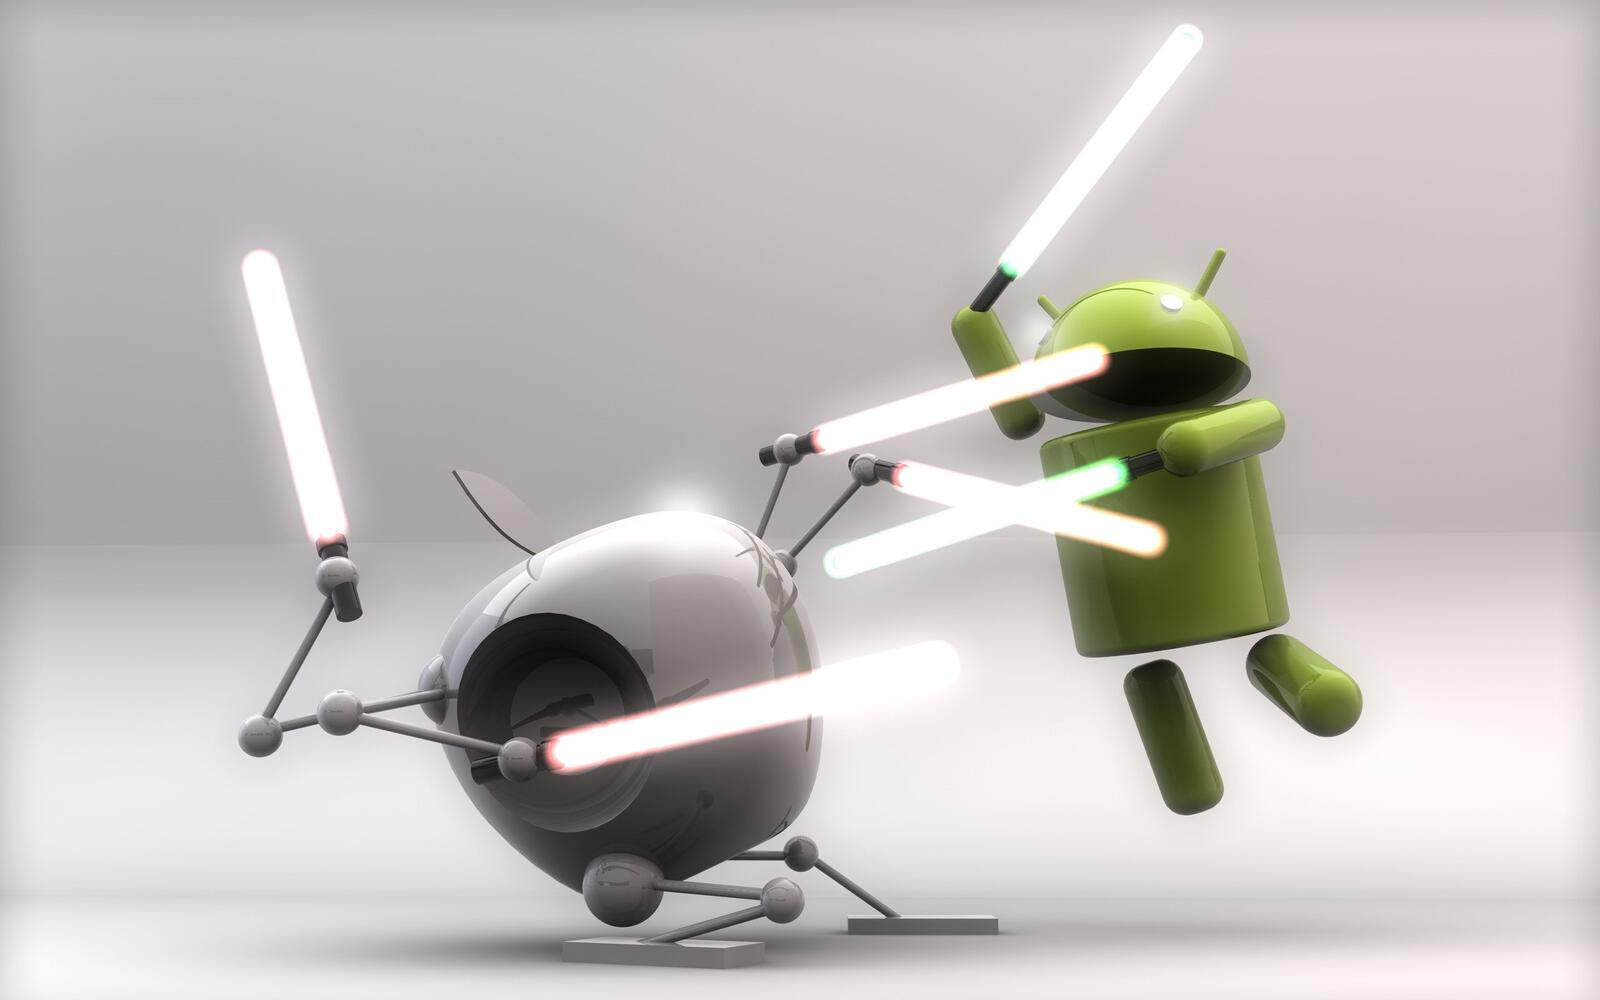 Wallpapers android vs apple battle robots on the desktop